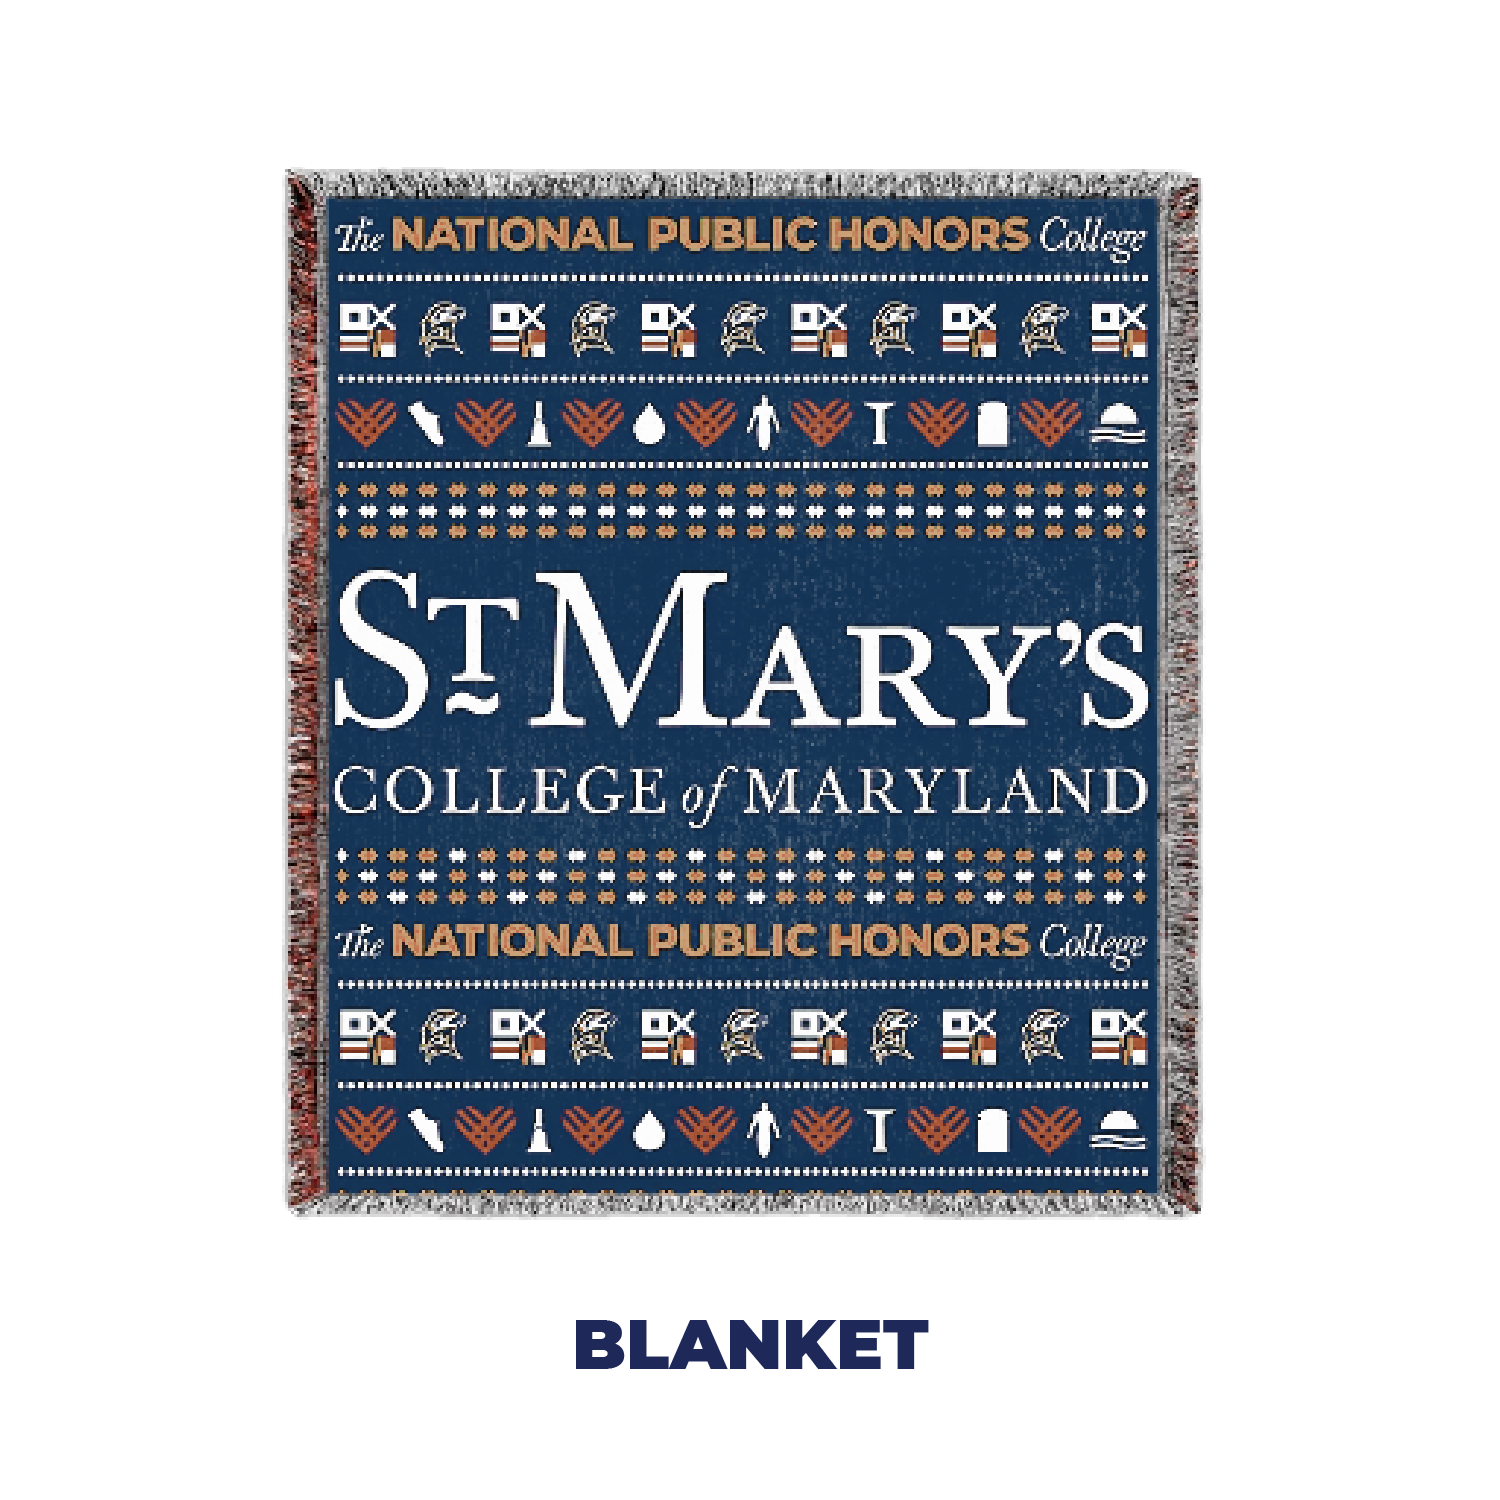 blanket with the St. Mary's College of Maryland logo